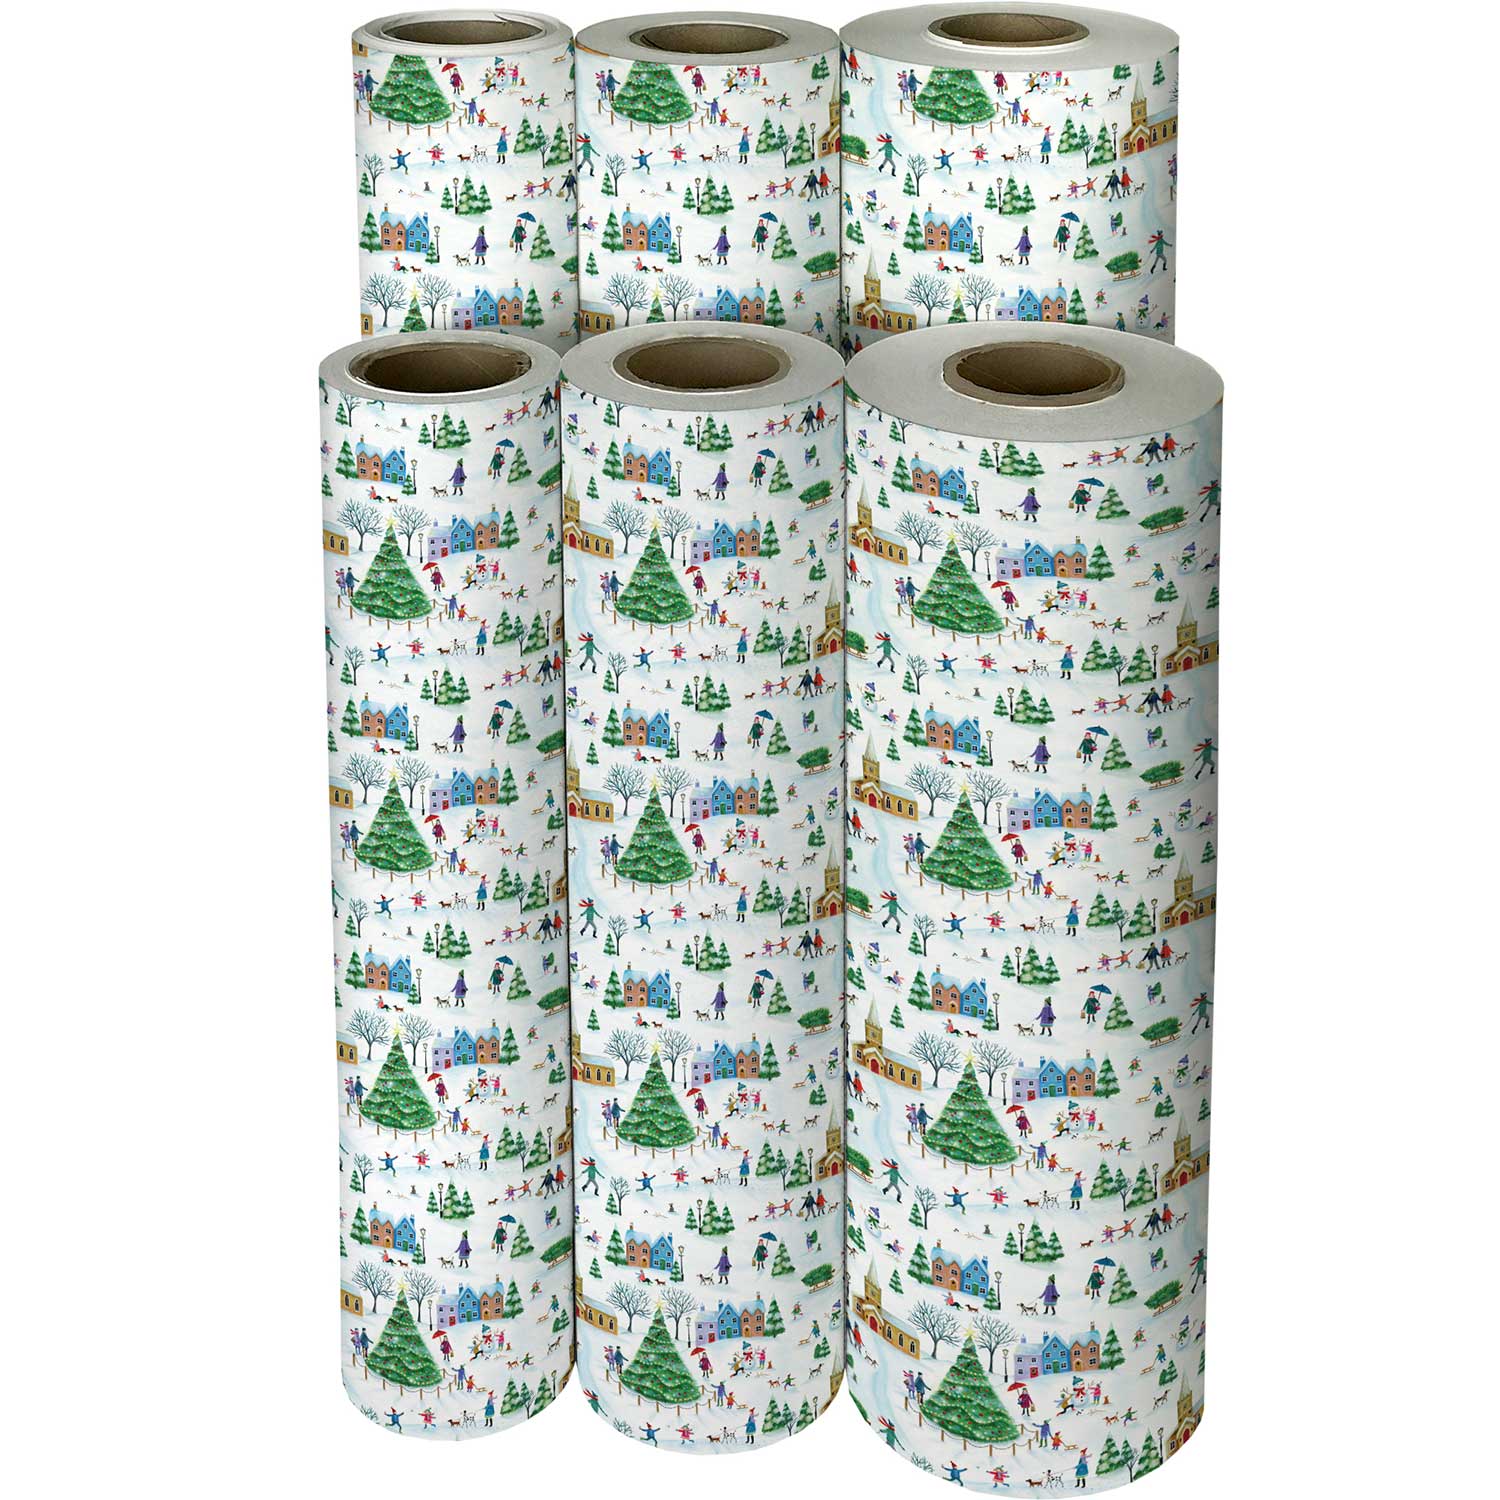 XB607f Christmas Village Town Gift Wrapping Paper Reams 